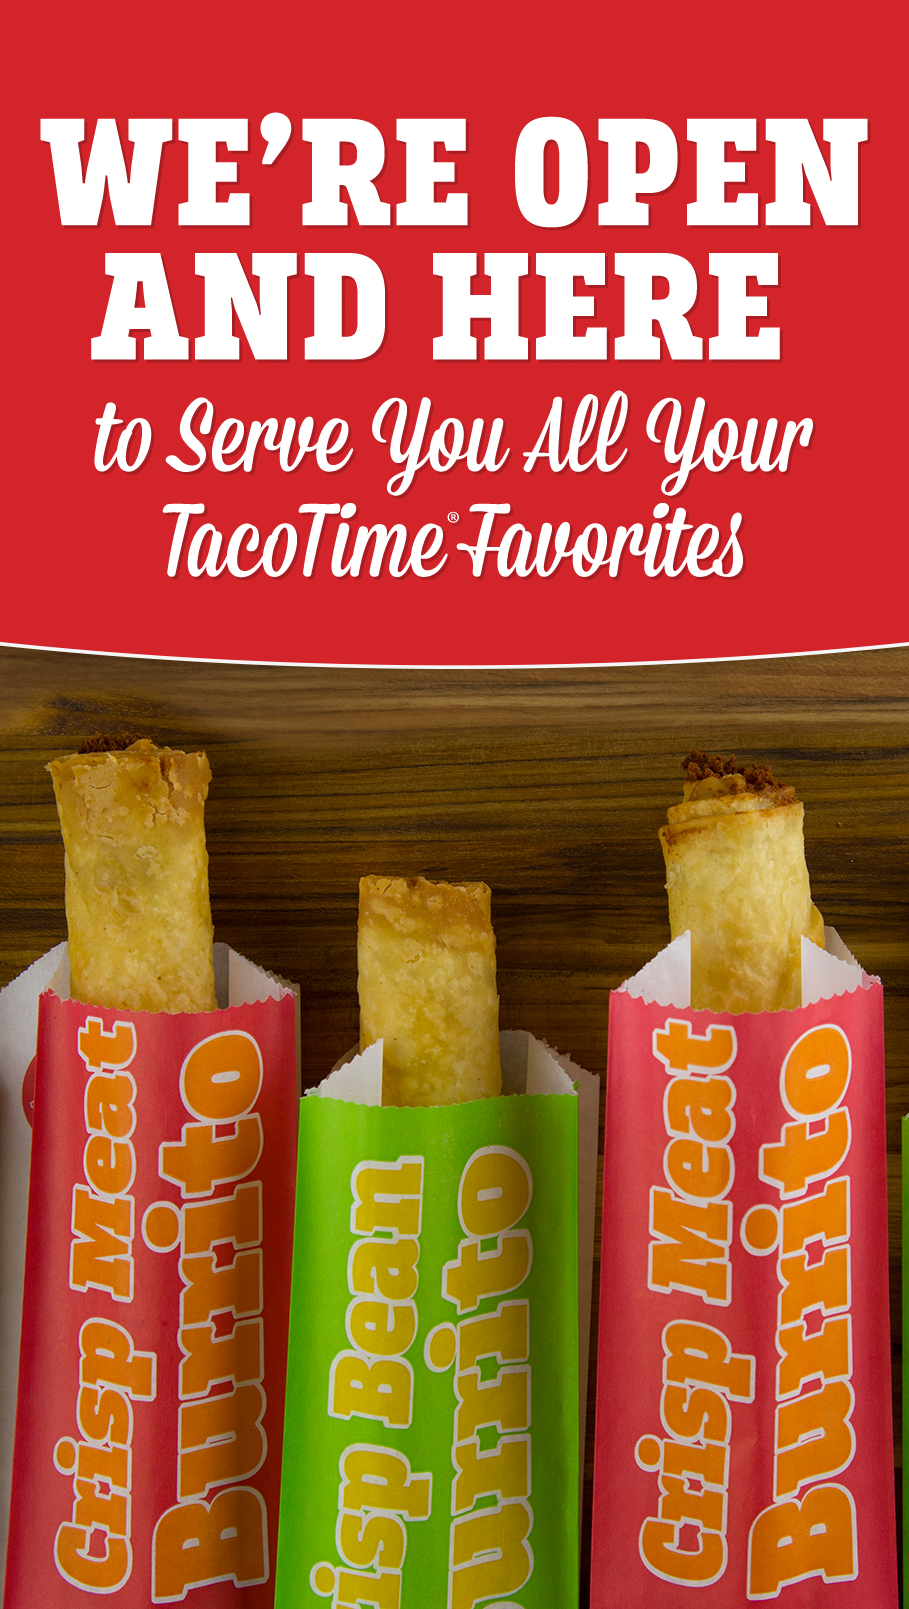 Tacotime Home Style Mexican Food Restaurant